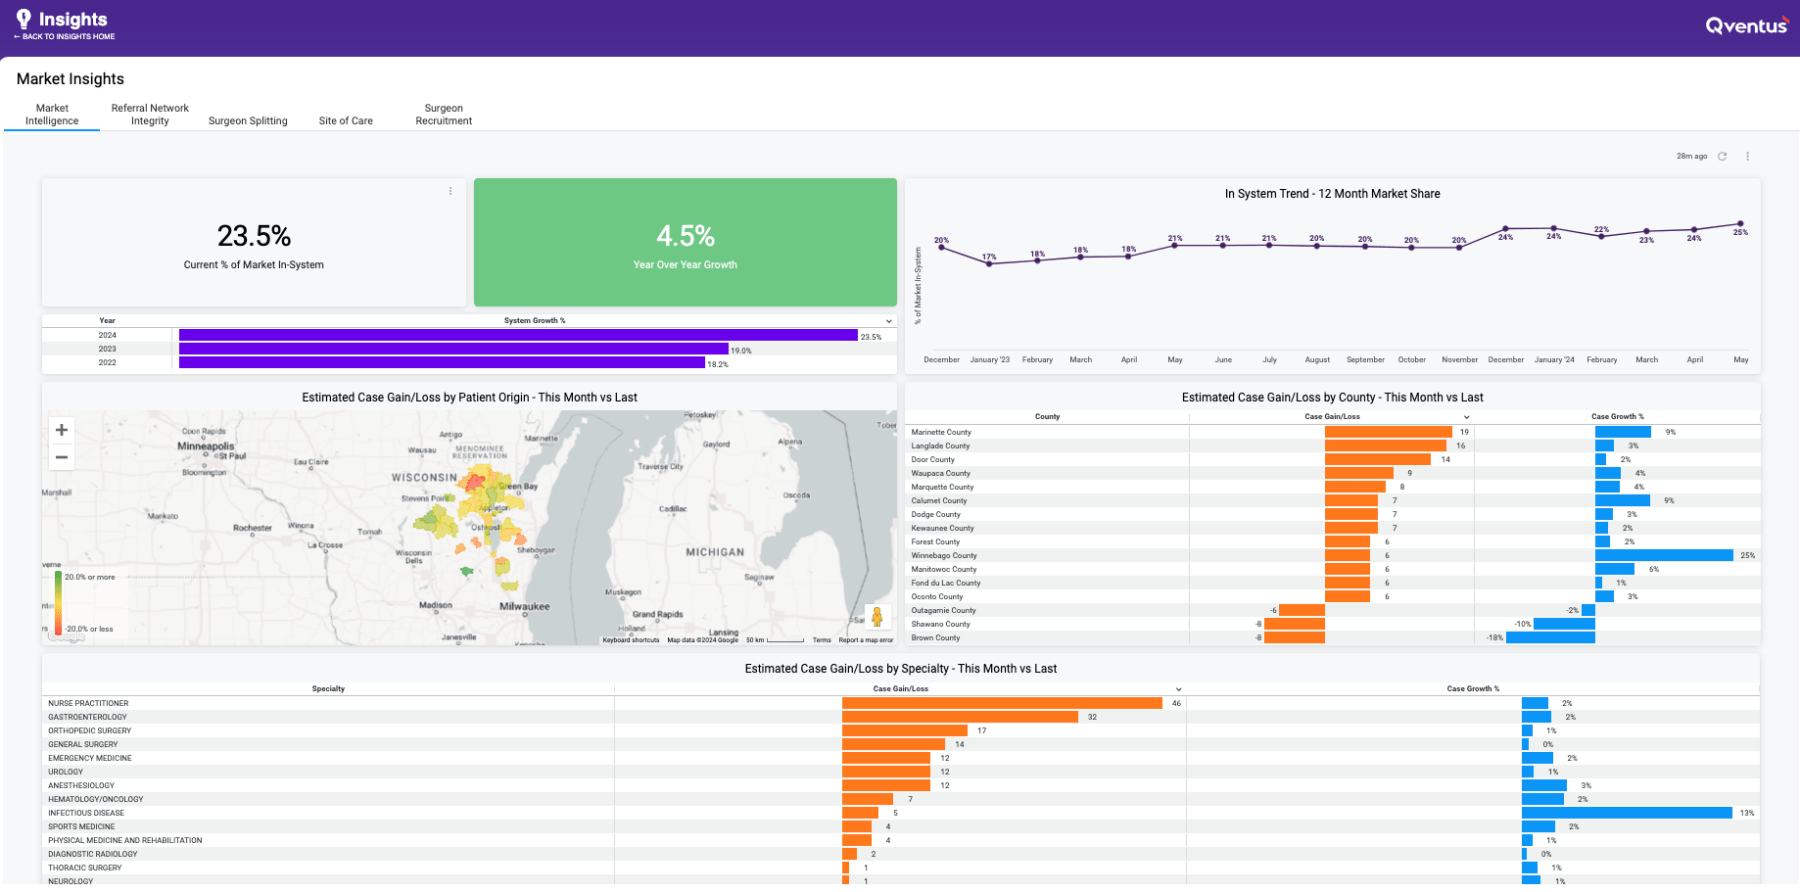 A screenshot showing various graphs and charts from the Market Insights page in the Qventus Perioperative Solution